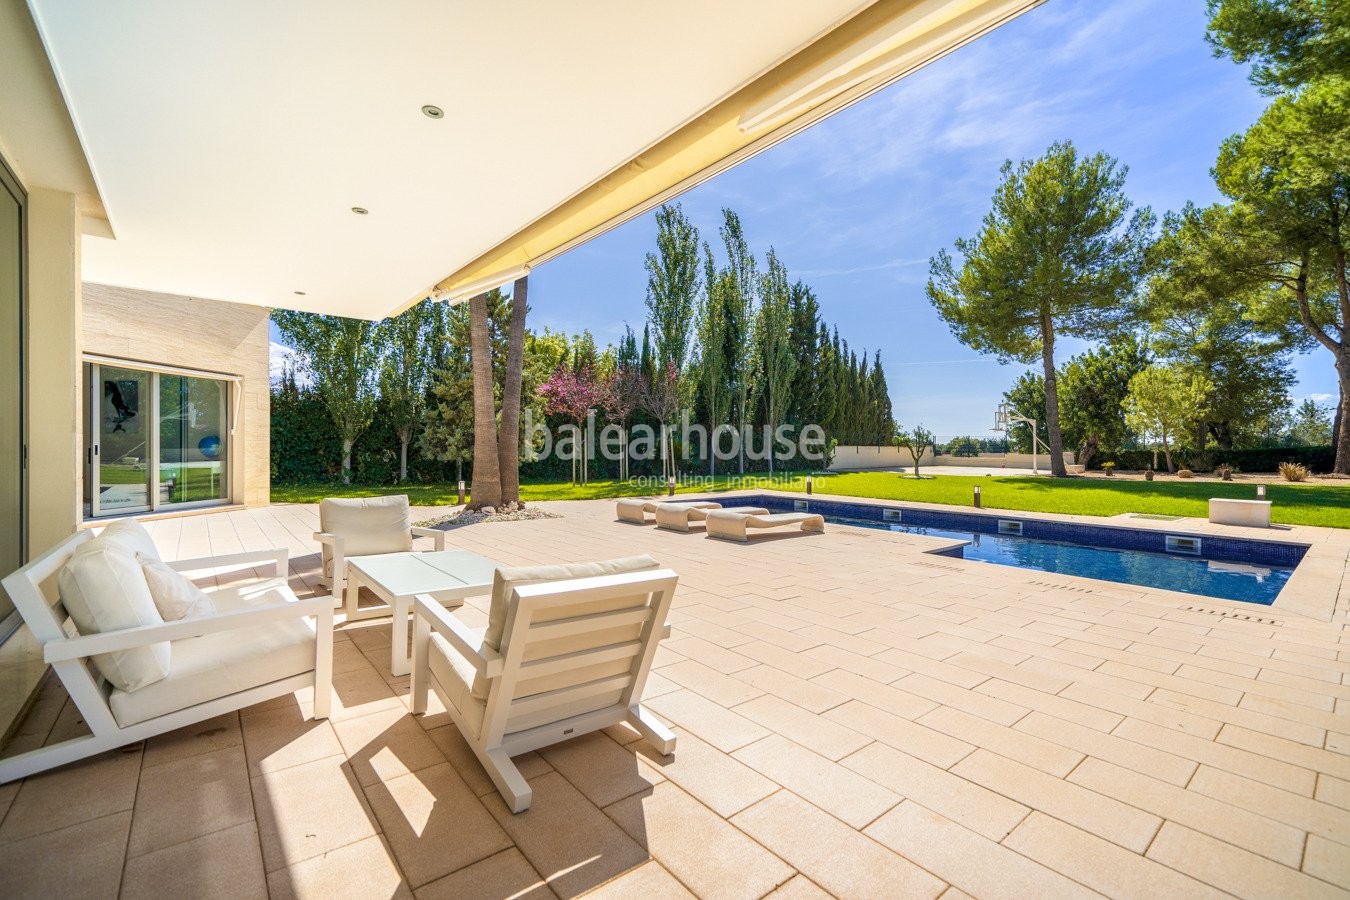 Modern villa with ample light-filled spaces, large garden and swimming pool very close to Palma.